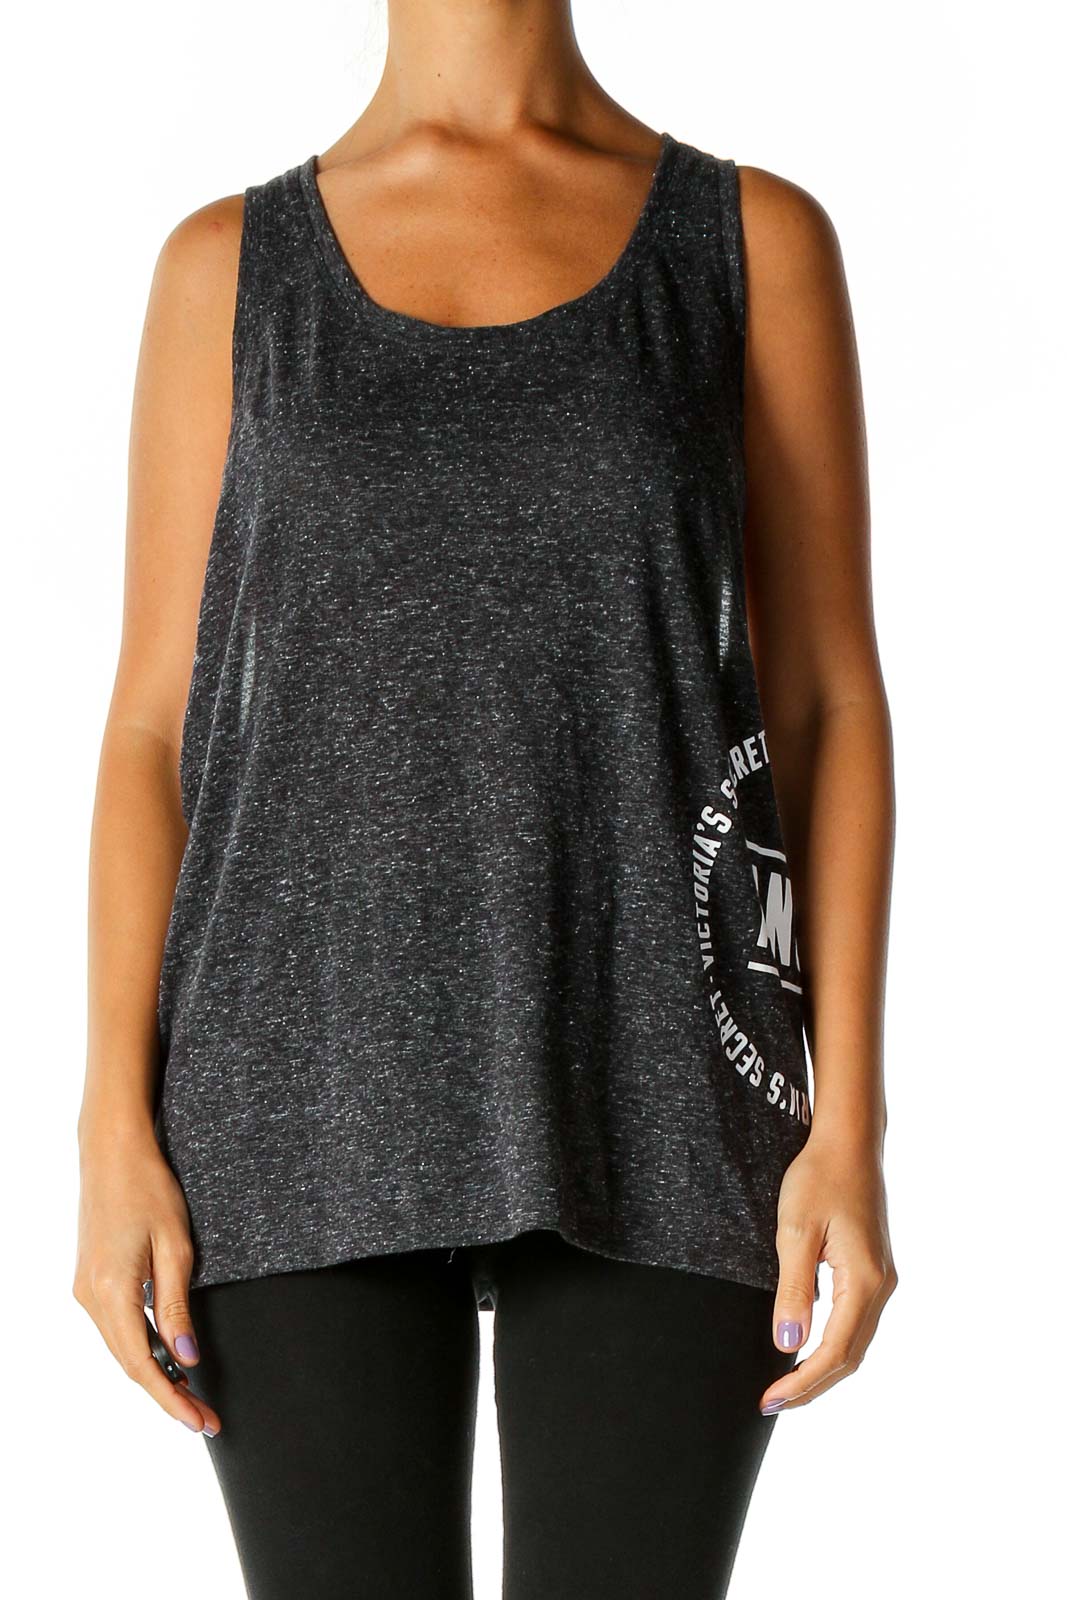 Gray Sequin All Day Wear Tank Top Front